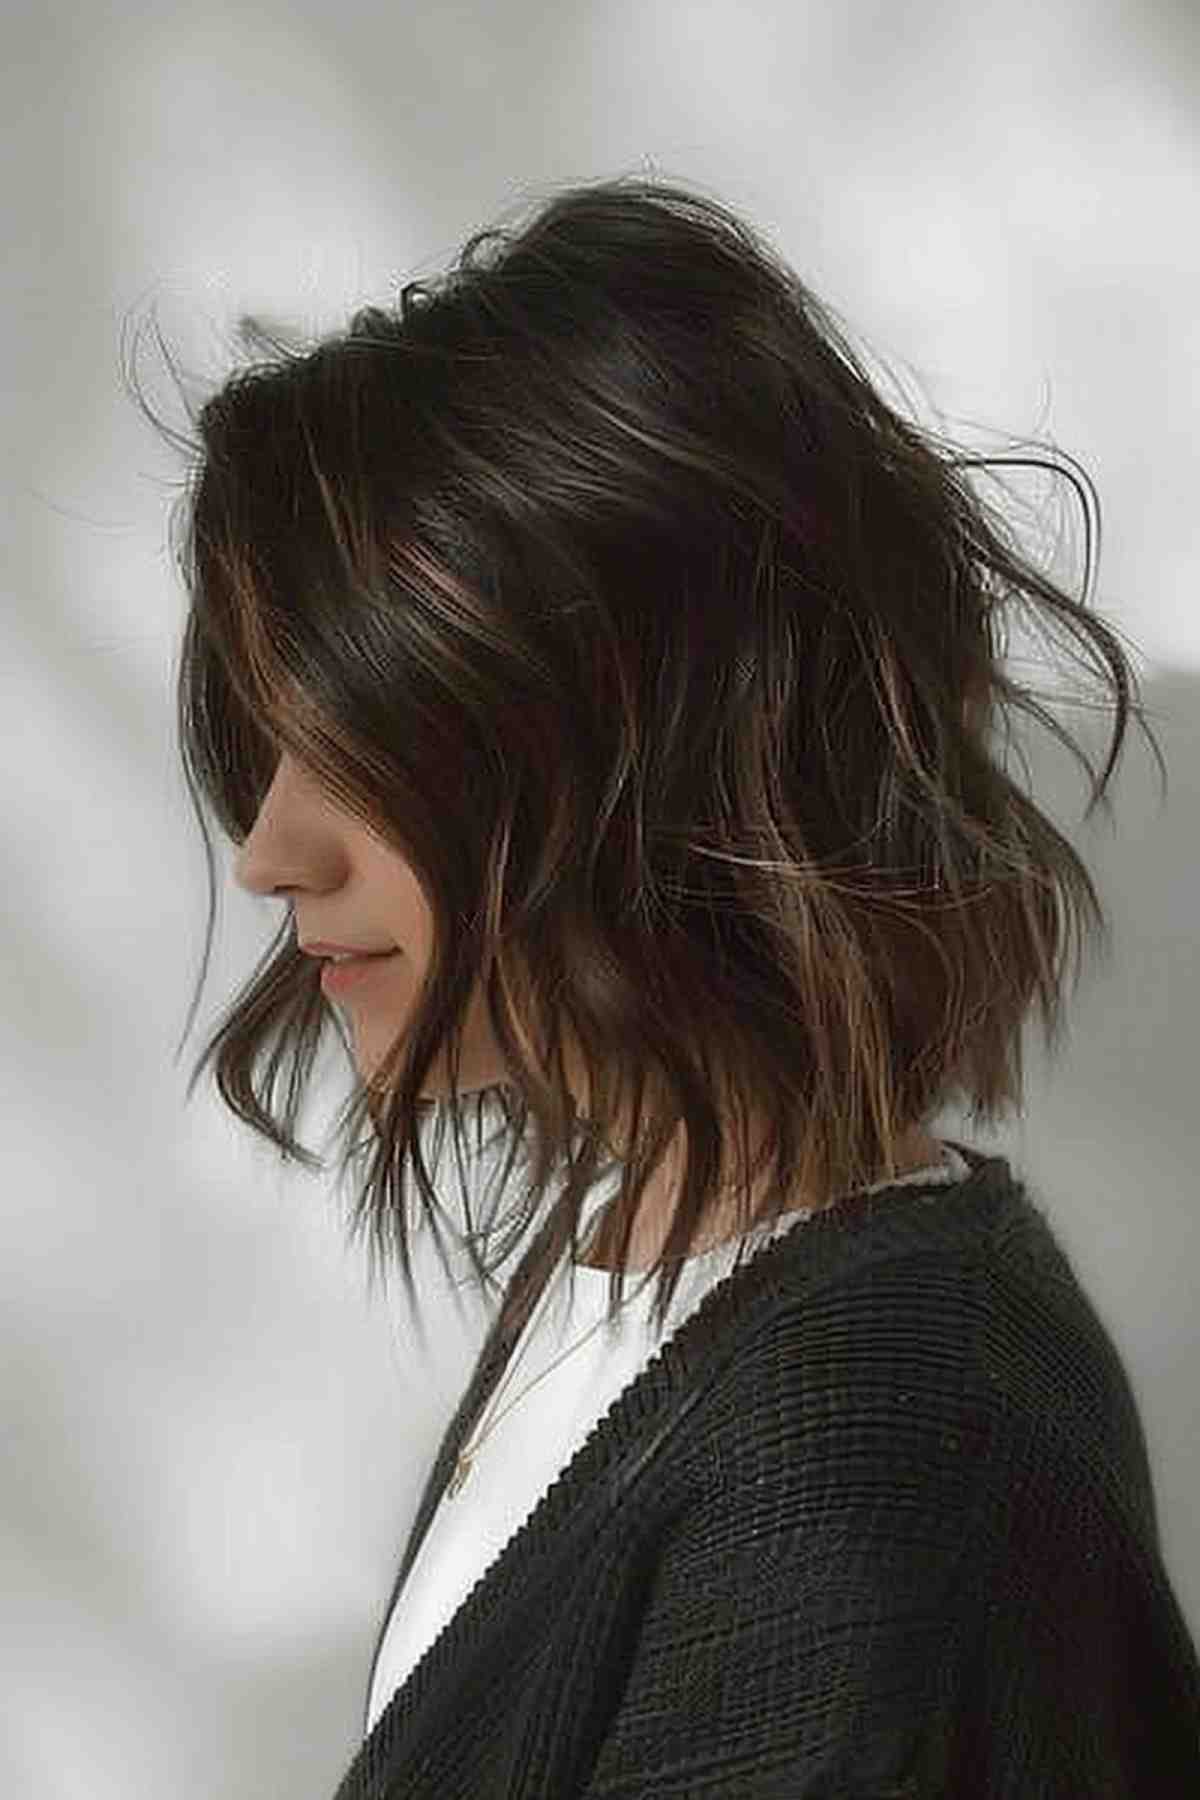 Woman with Short Messy Partial Balayage Bob Hairstyle